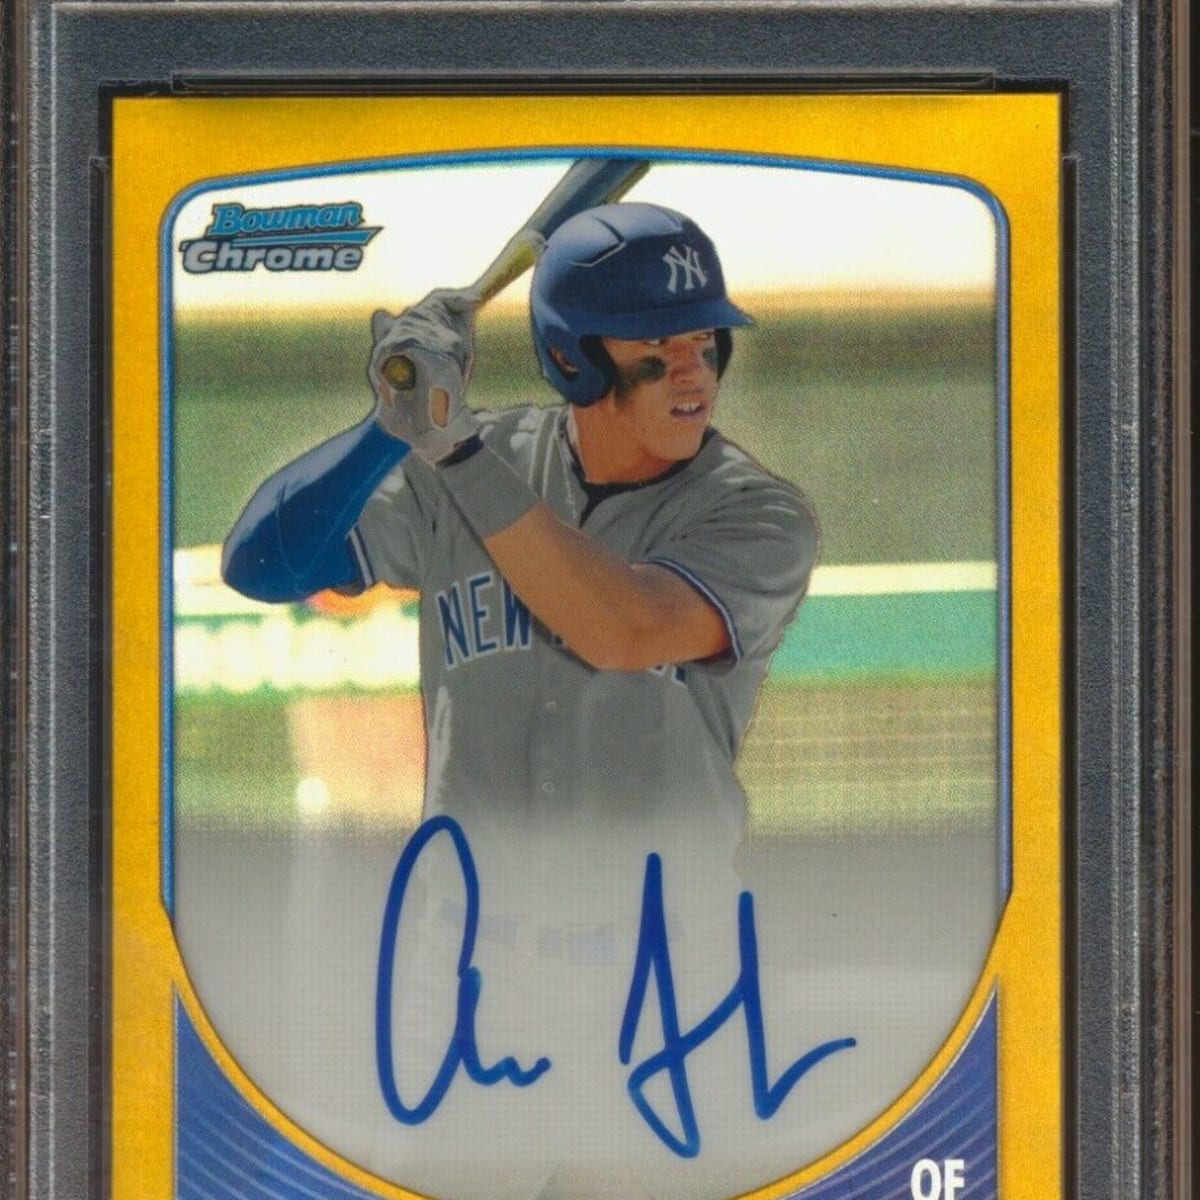 Aaron Judge Autograph Signed 2018 Topps Rookie Card 24 